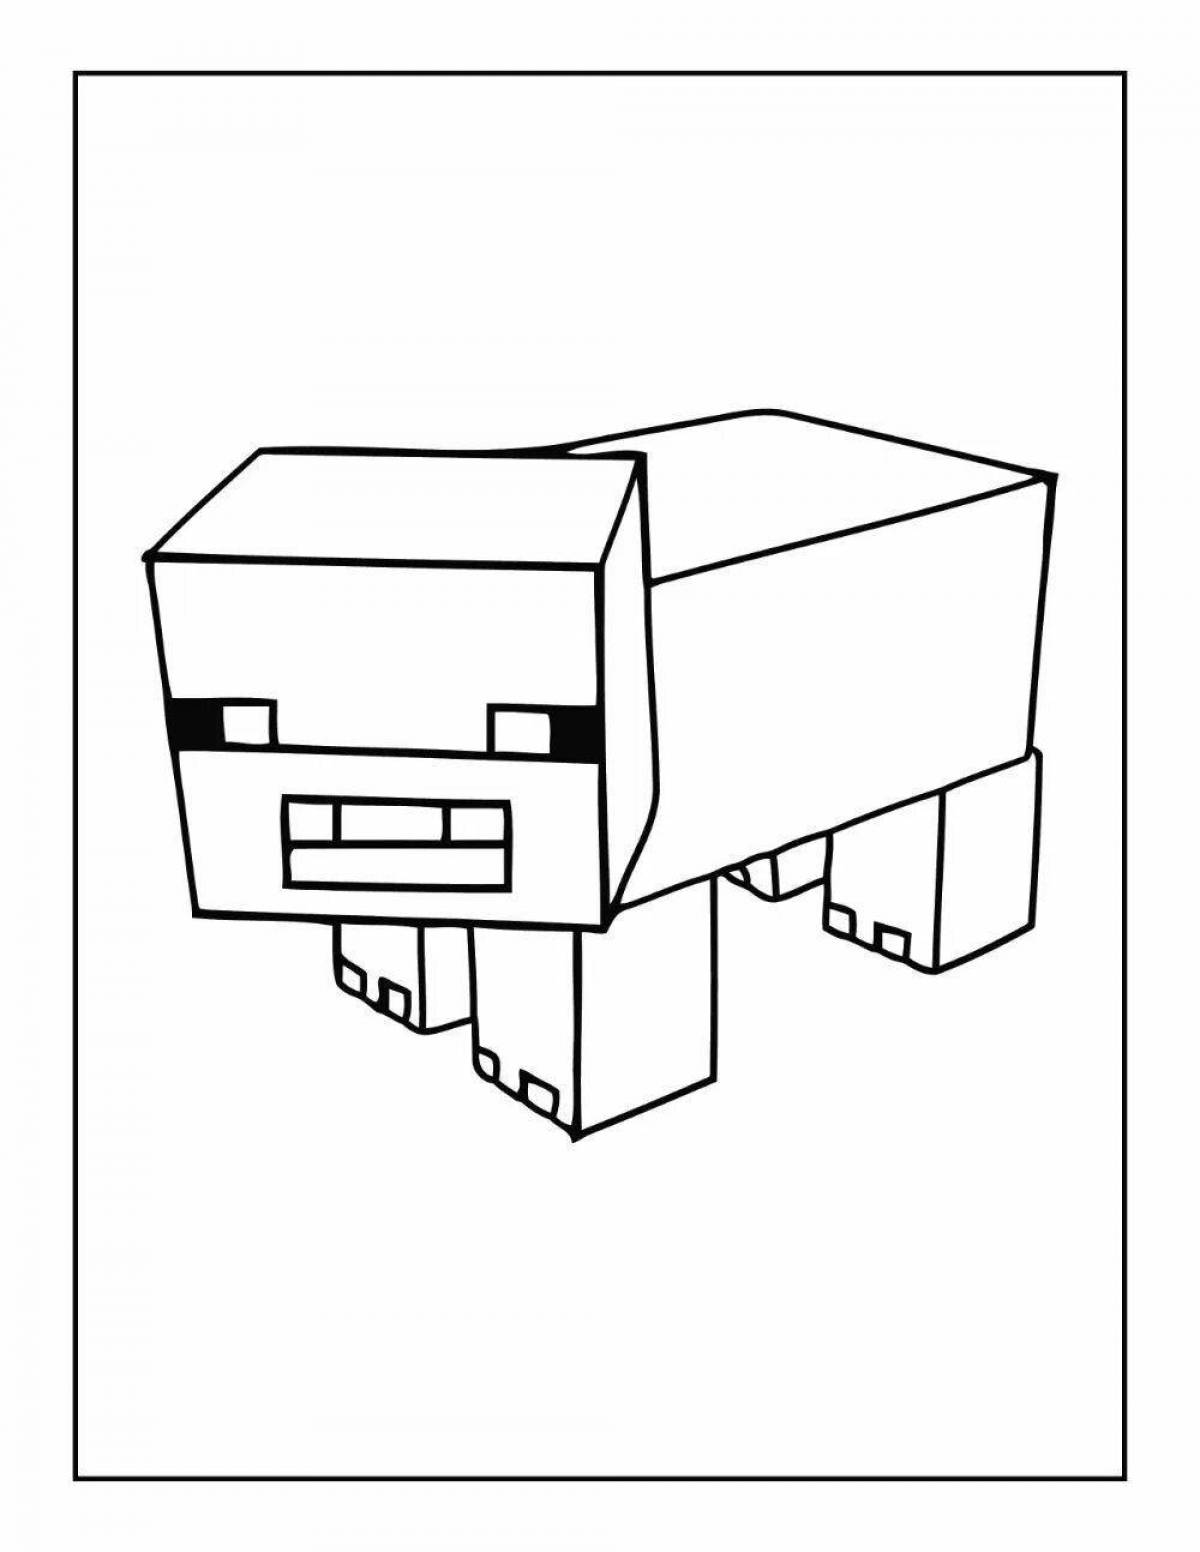 Incredible minecraft fish coloring page